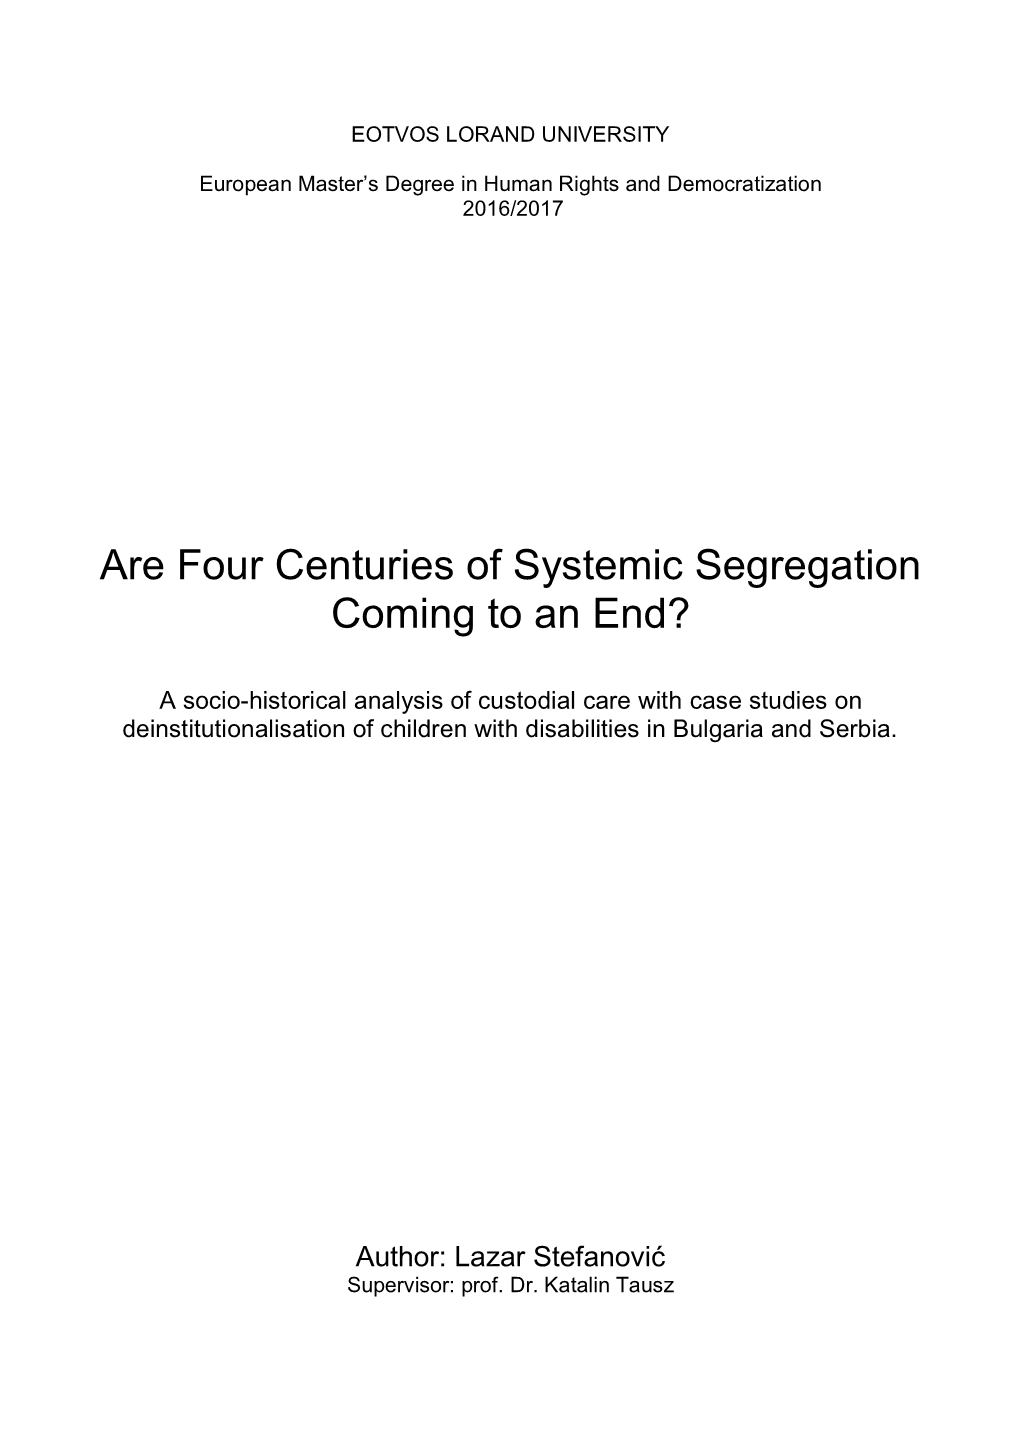 Are Four Centuries of Systemic Segregation Coming to an End?